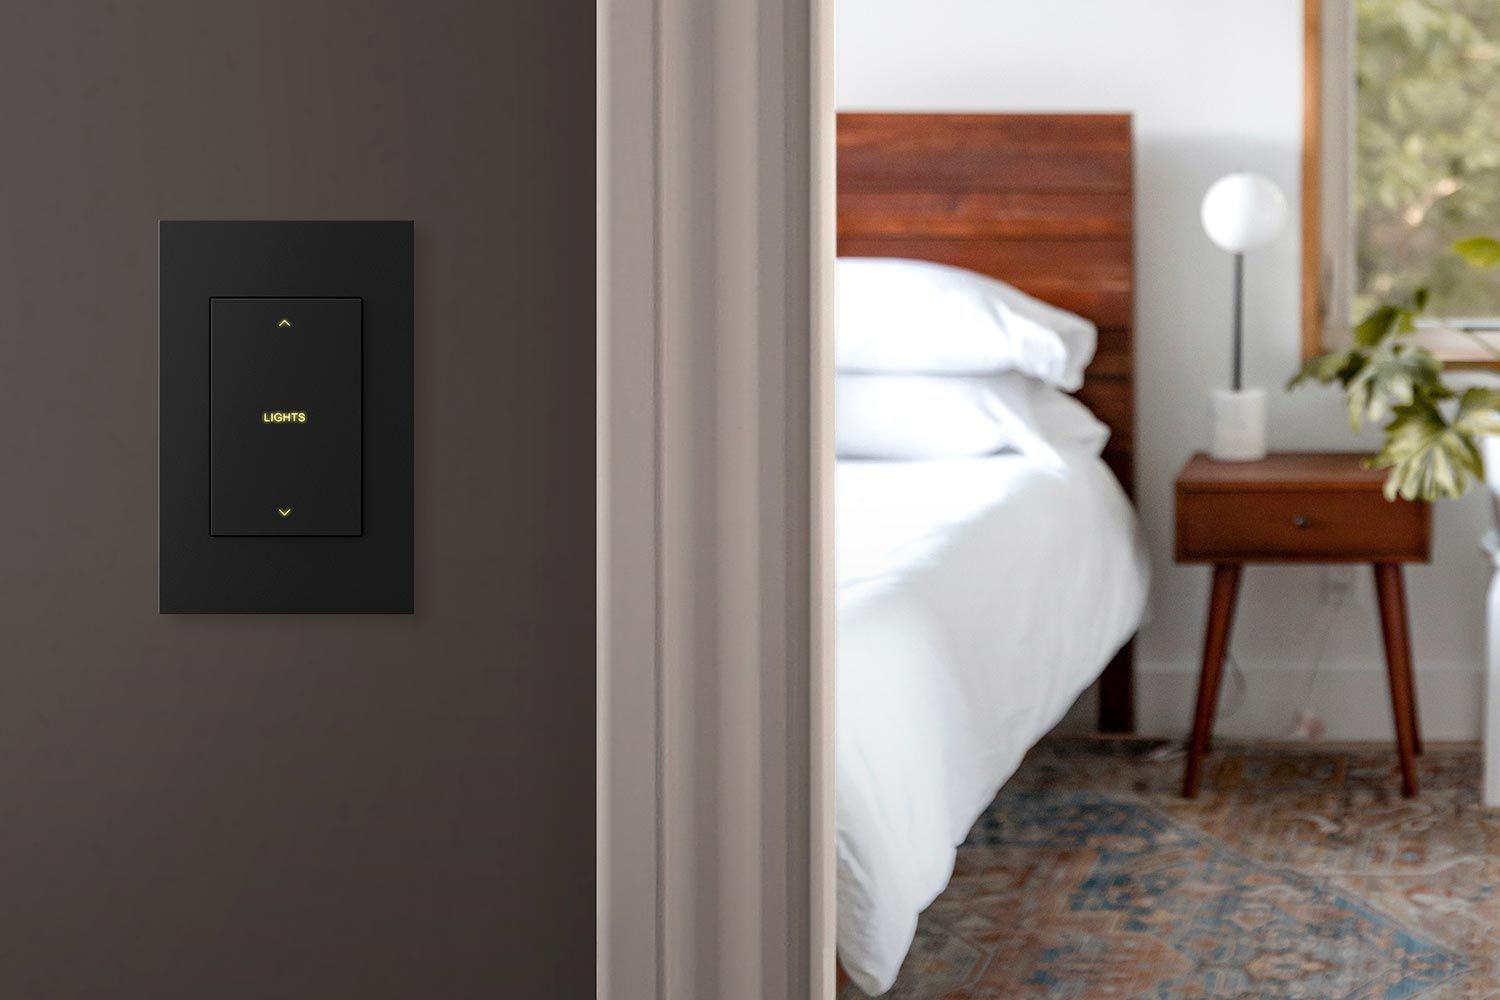 A close-up of a sleek, modern light switch on a dark wall, with a bedroom visible in the background featuring a wooden bed and a side table with a lamp.